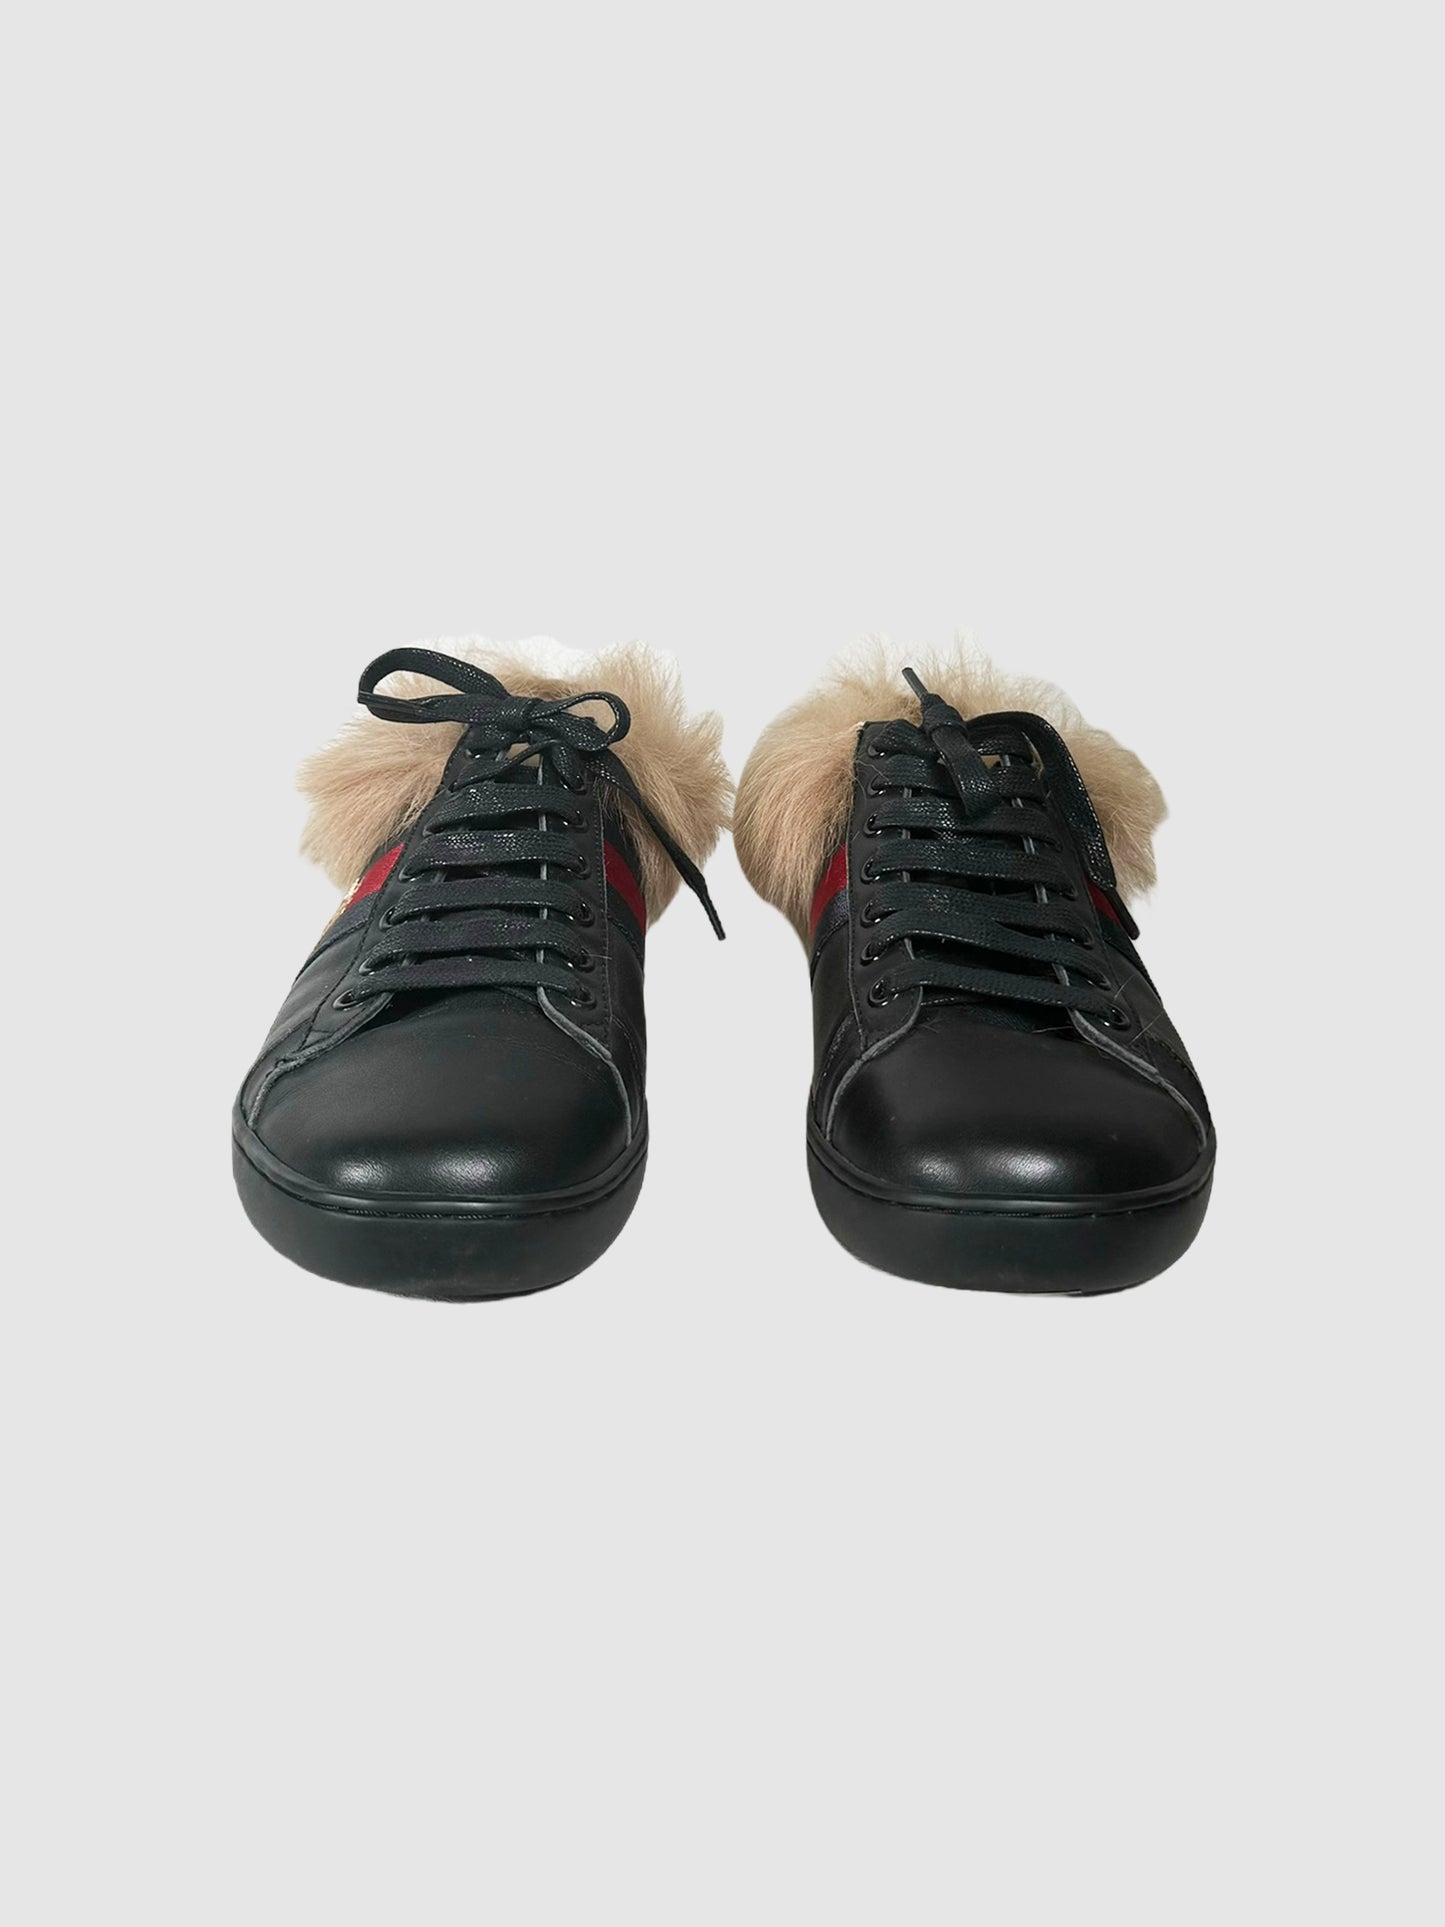 Gucci Bee Fur Lined Sneakers - Size 38.5